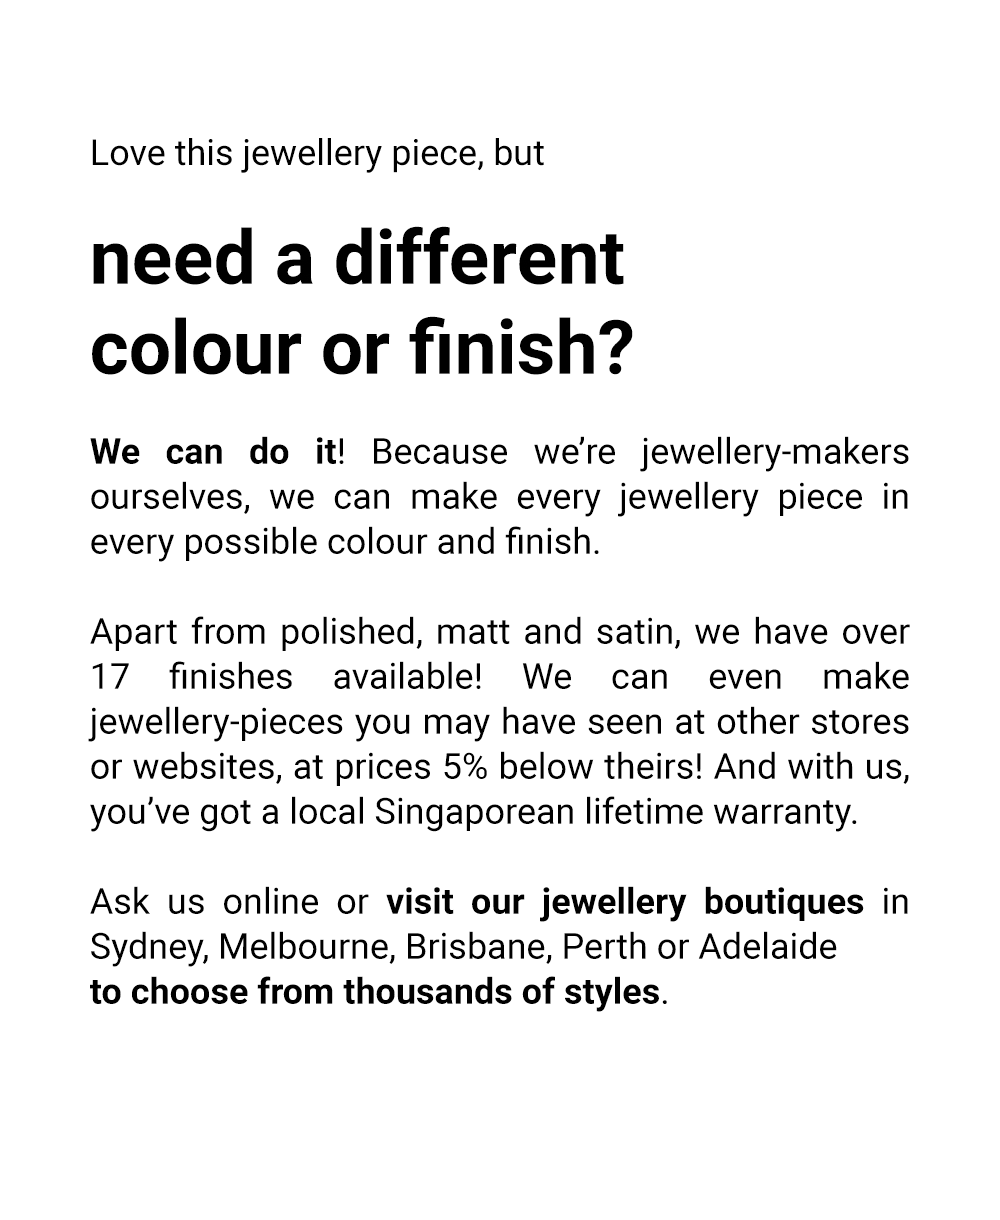 need a different colour or finish?